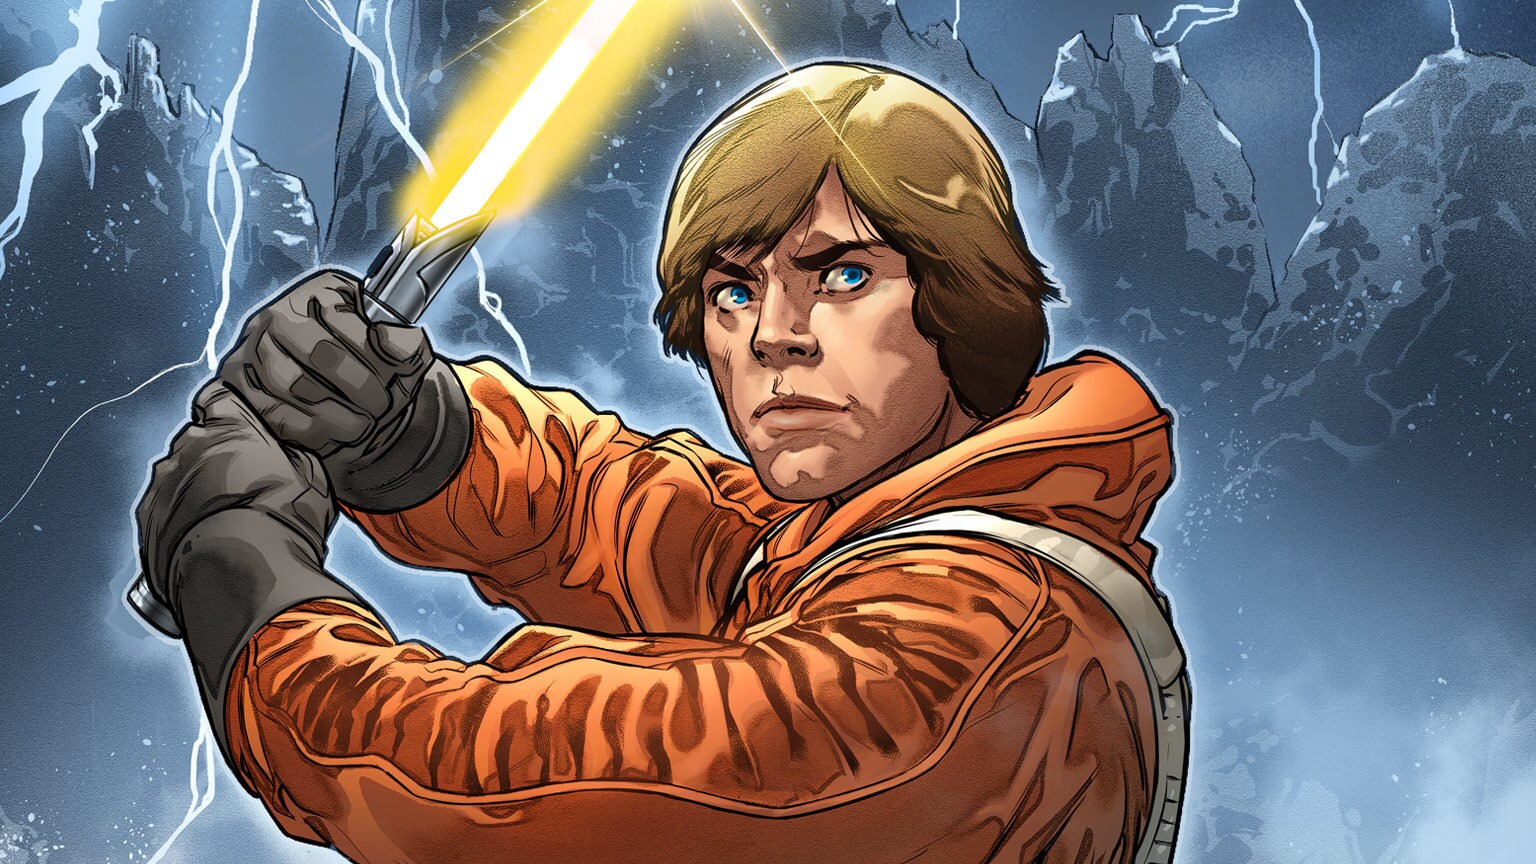 R2-D2 Saves the Day (Again) in Marvel's Star Wars #6 - Exclusive